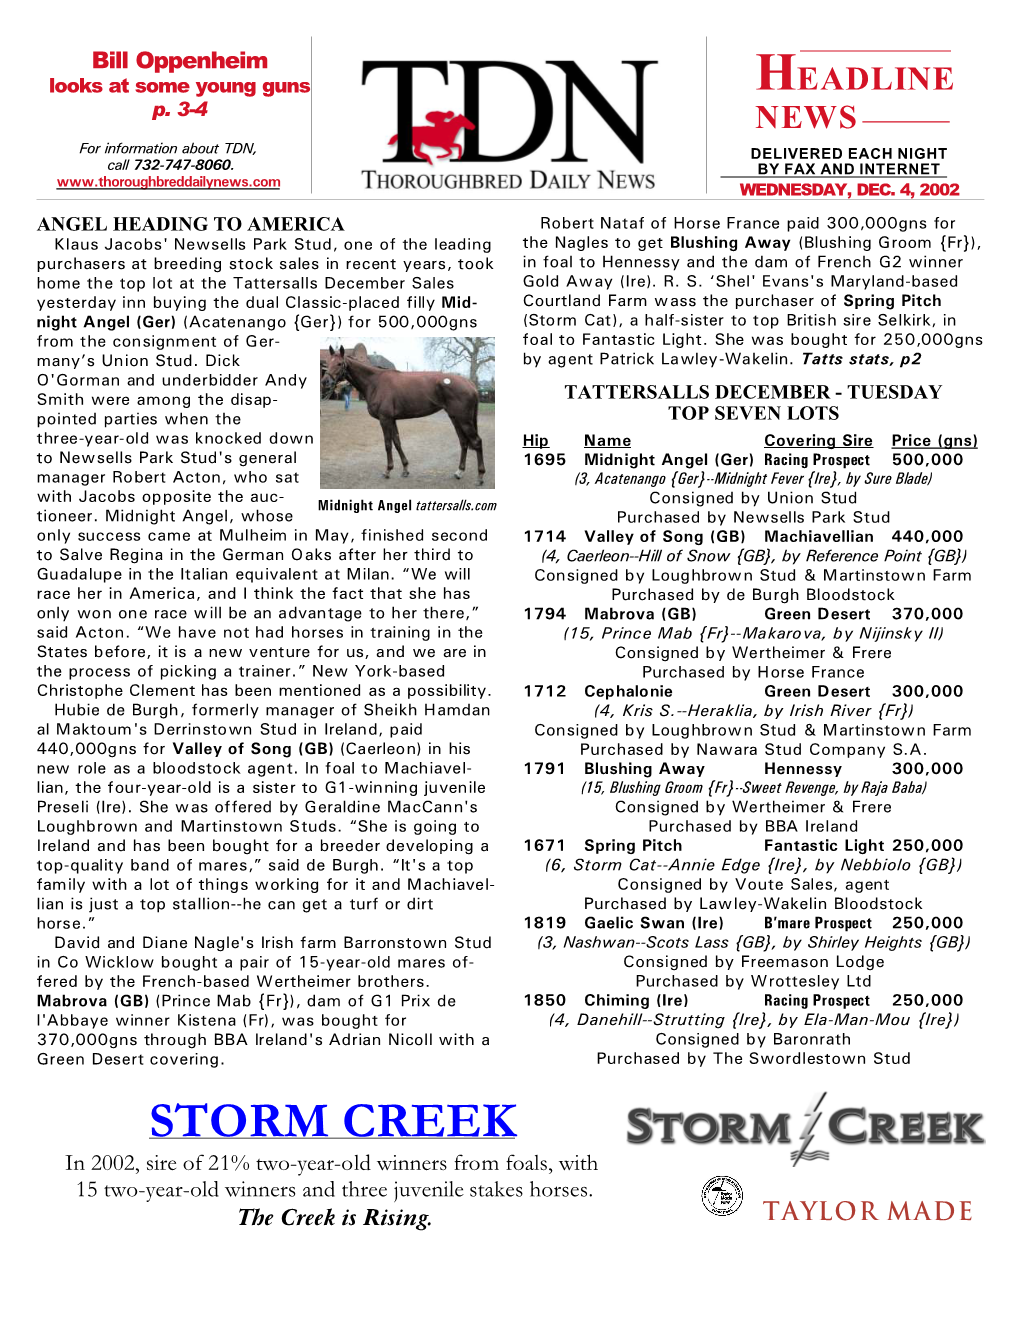 STORM CREEK in 2002, Sire of 21% Two-Year-Old Winners from Foals, with 15 Two-Year-Old Winners and Three Juvenile Stakes Horses